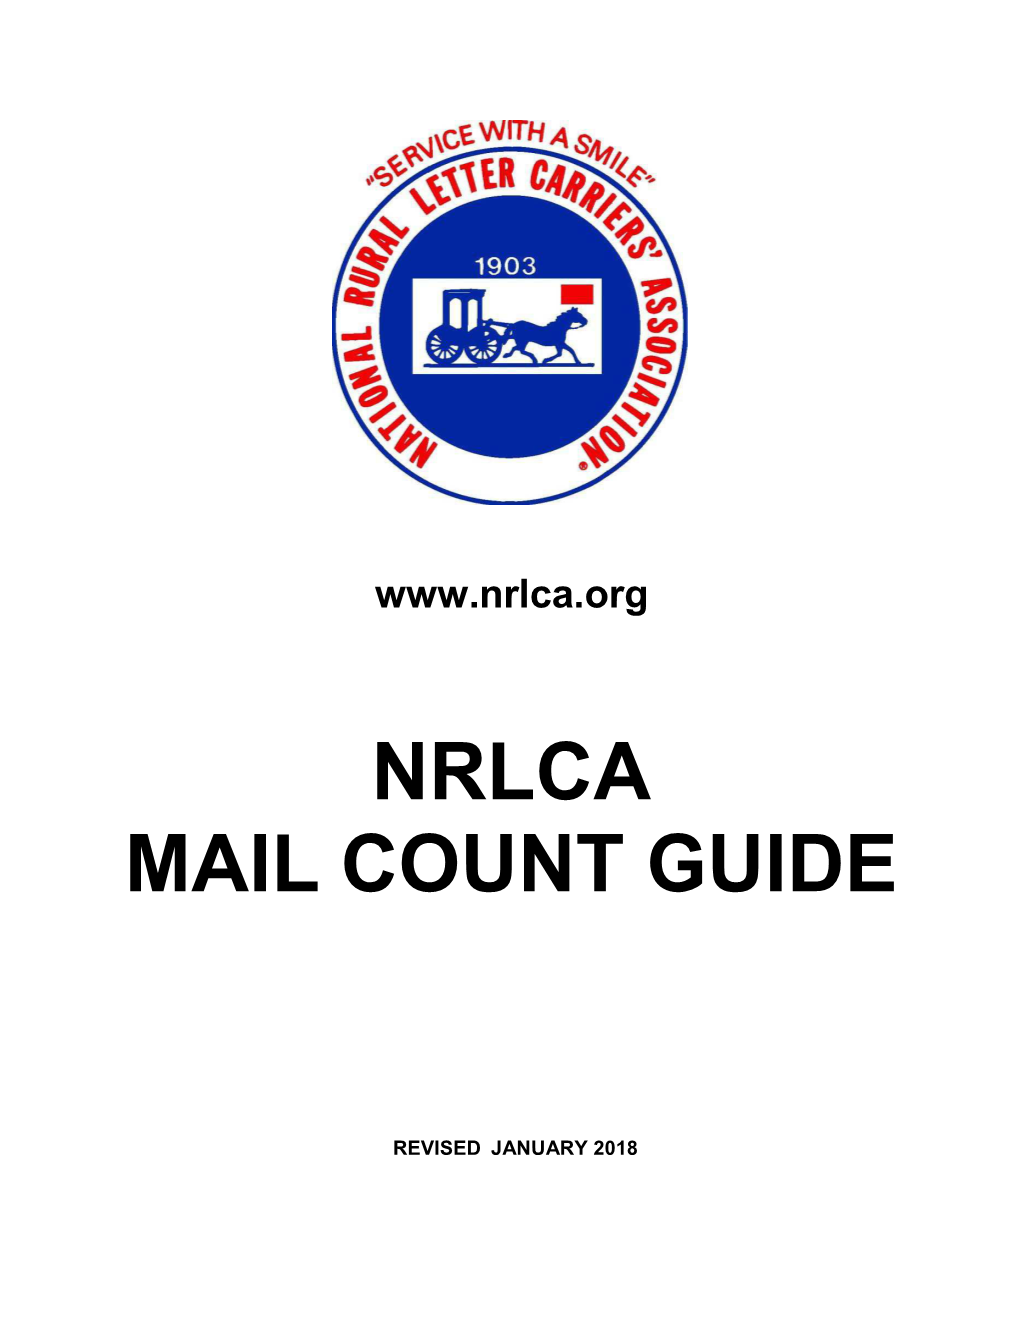 Nrlca Mail Count Guide